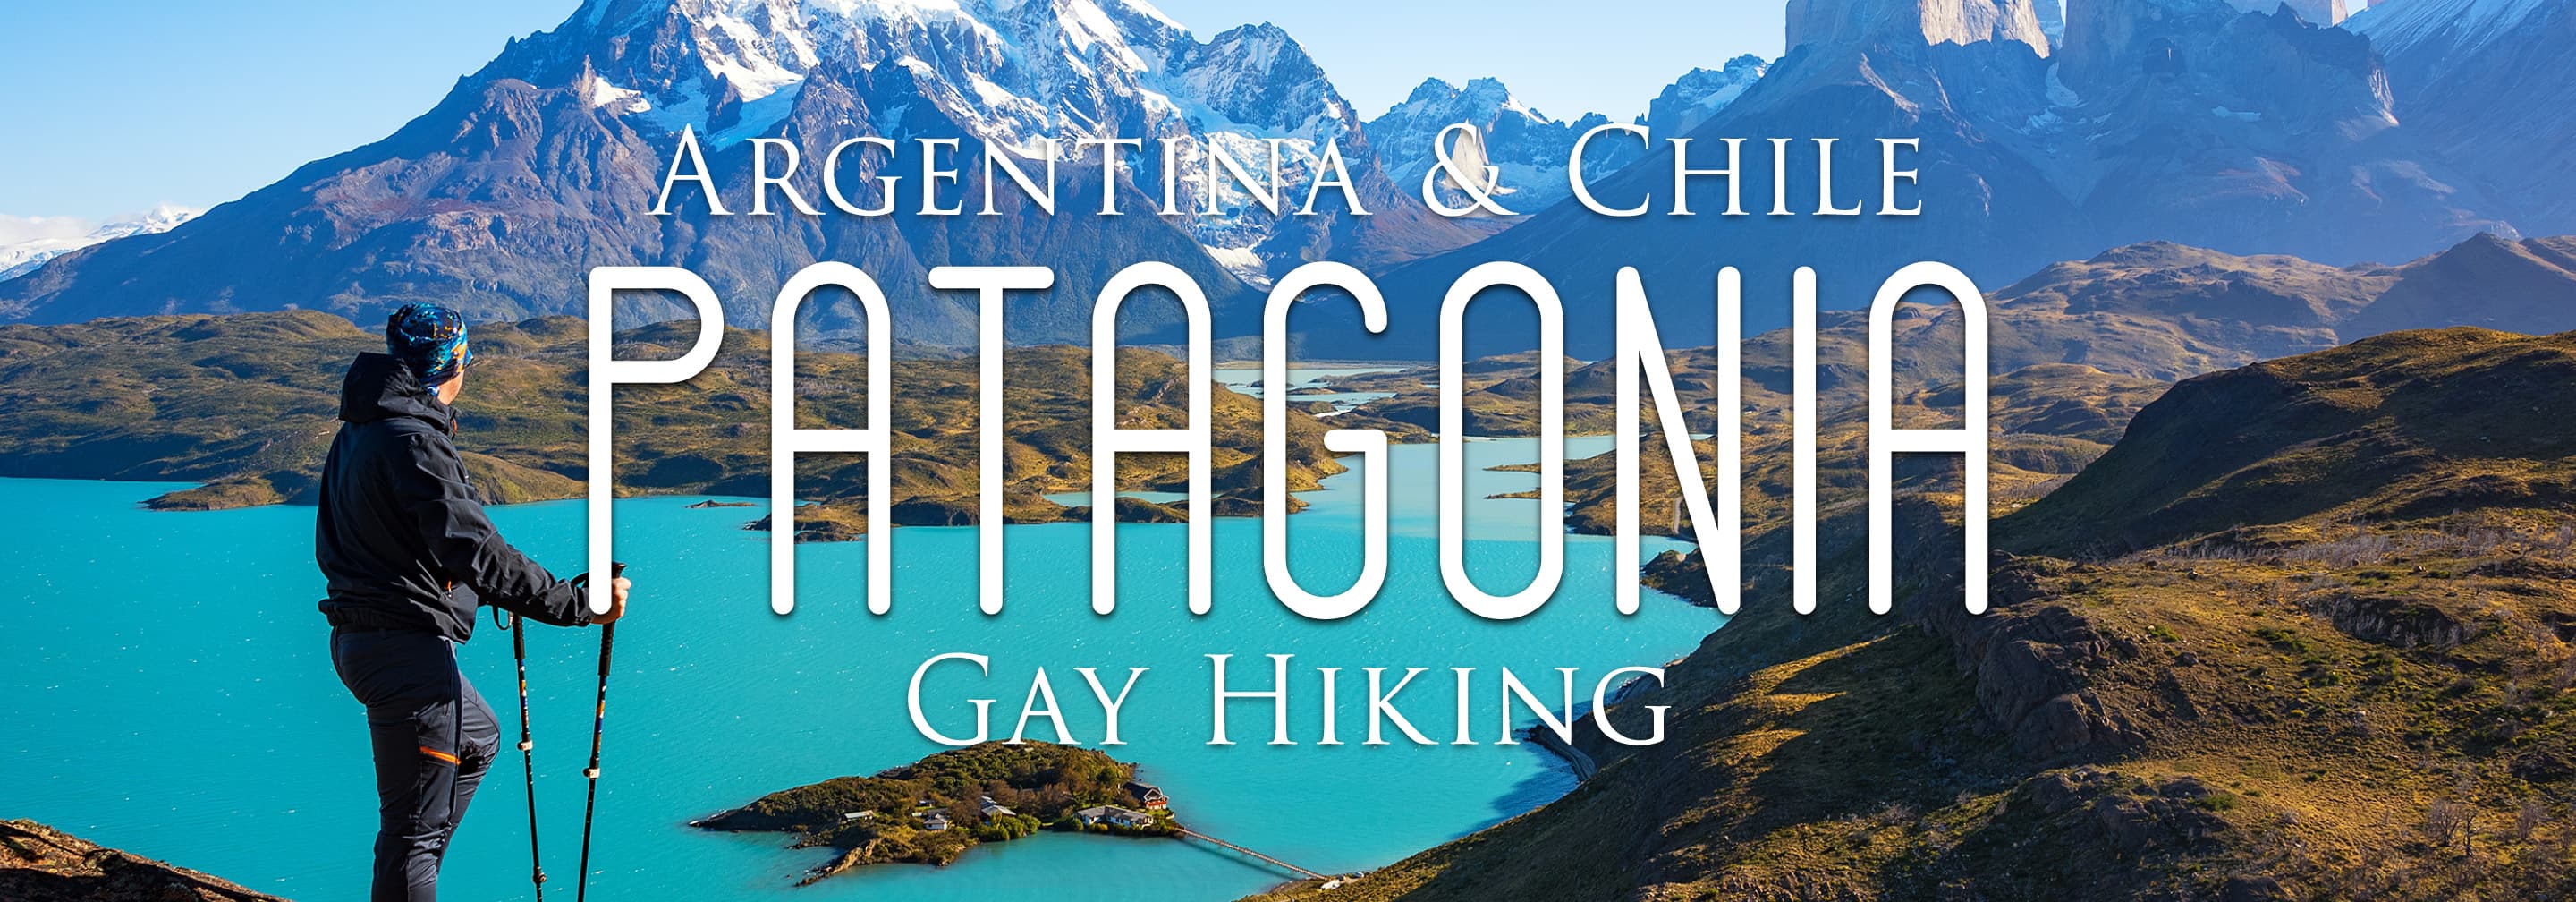 The header image for Out Adventures' Argentina & Chile: Patagonia Gay Hiking tour.